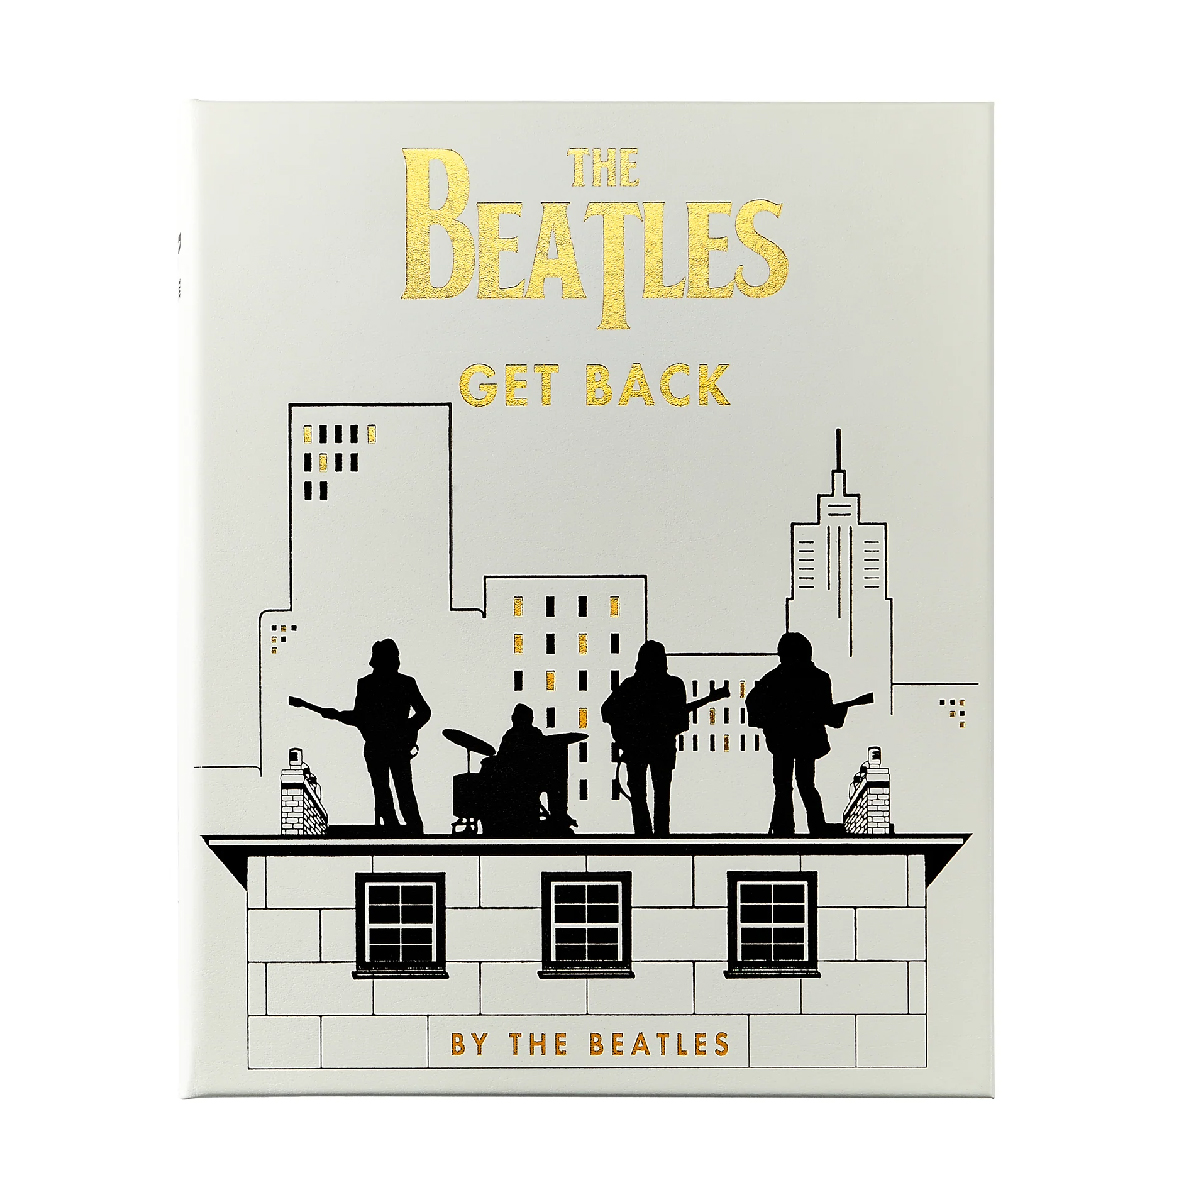 Graphic Image - "The Beatles: Get Back" by The Beatles